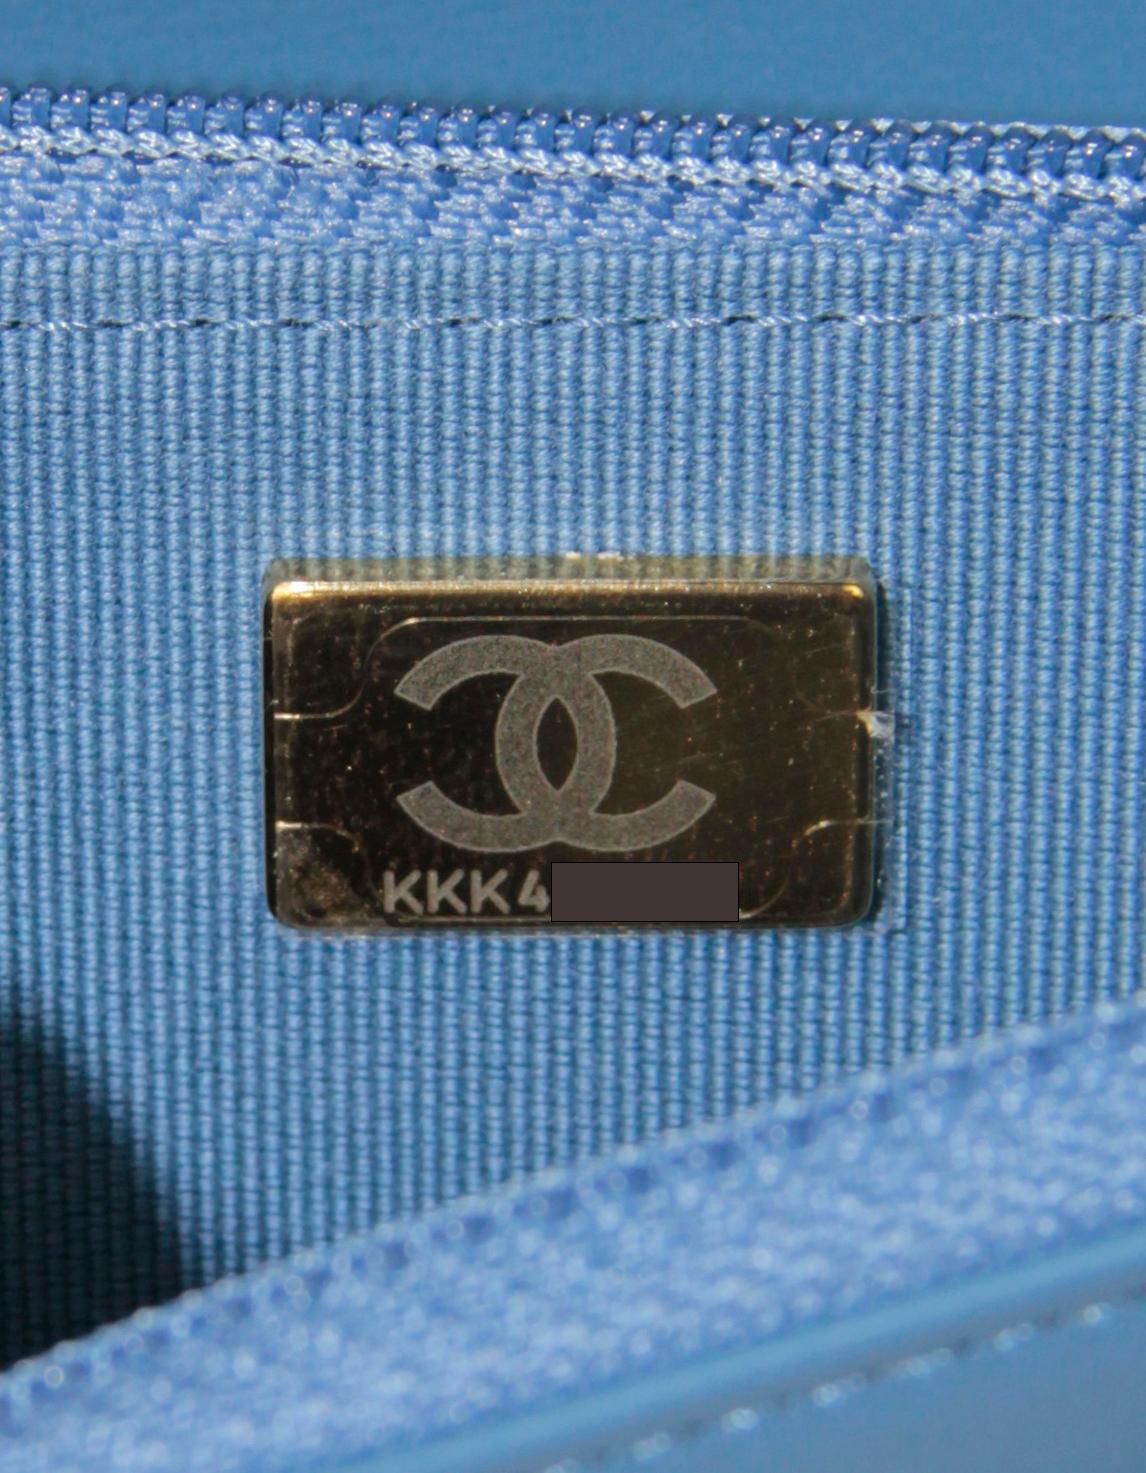 Chanel 2022 Denim Quilted 19 Wallet On Chain WOC Crossbody Bag.  This bag has a microchip and was not made with a hologram sticker or authenticity card.

Made In: Italy
Year of Production: 2022
Color: Blue
Hardware: Goldtone, darkened silver,